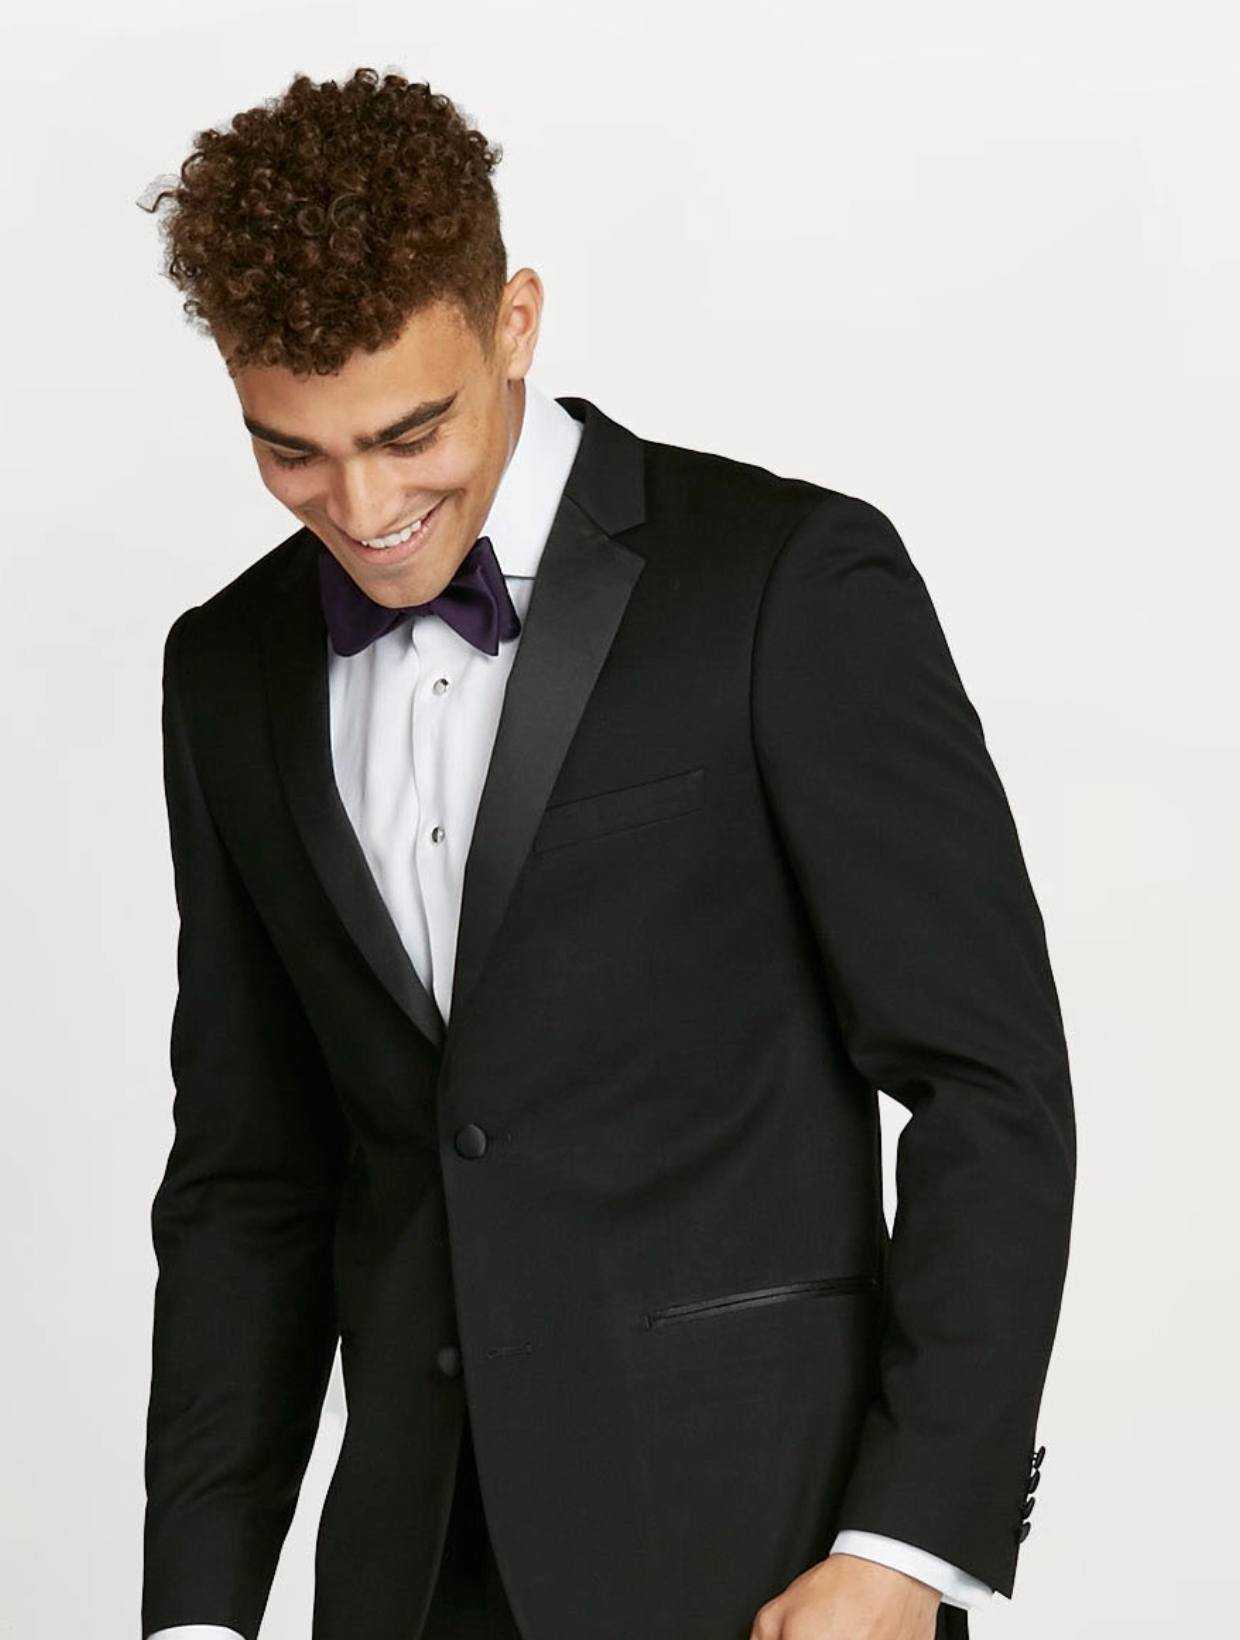 Candid prom picture of teen in black prom tuxedo, black prom bow tie & white tuxedo shirt.